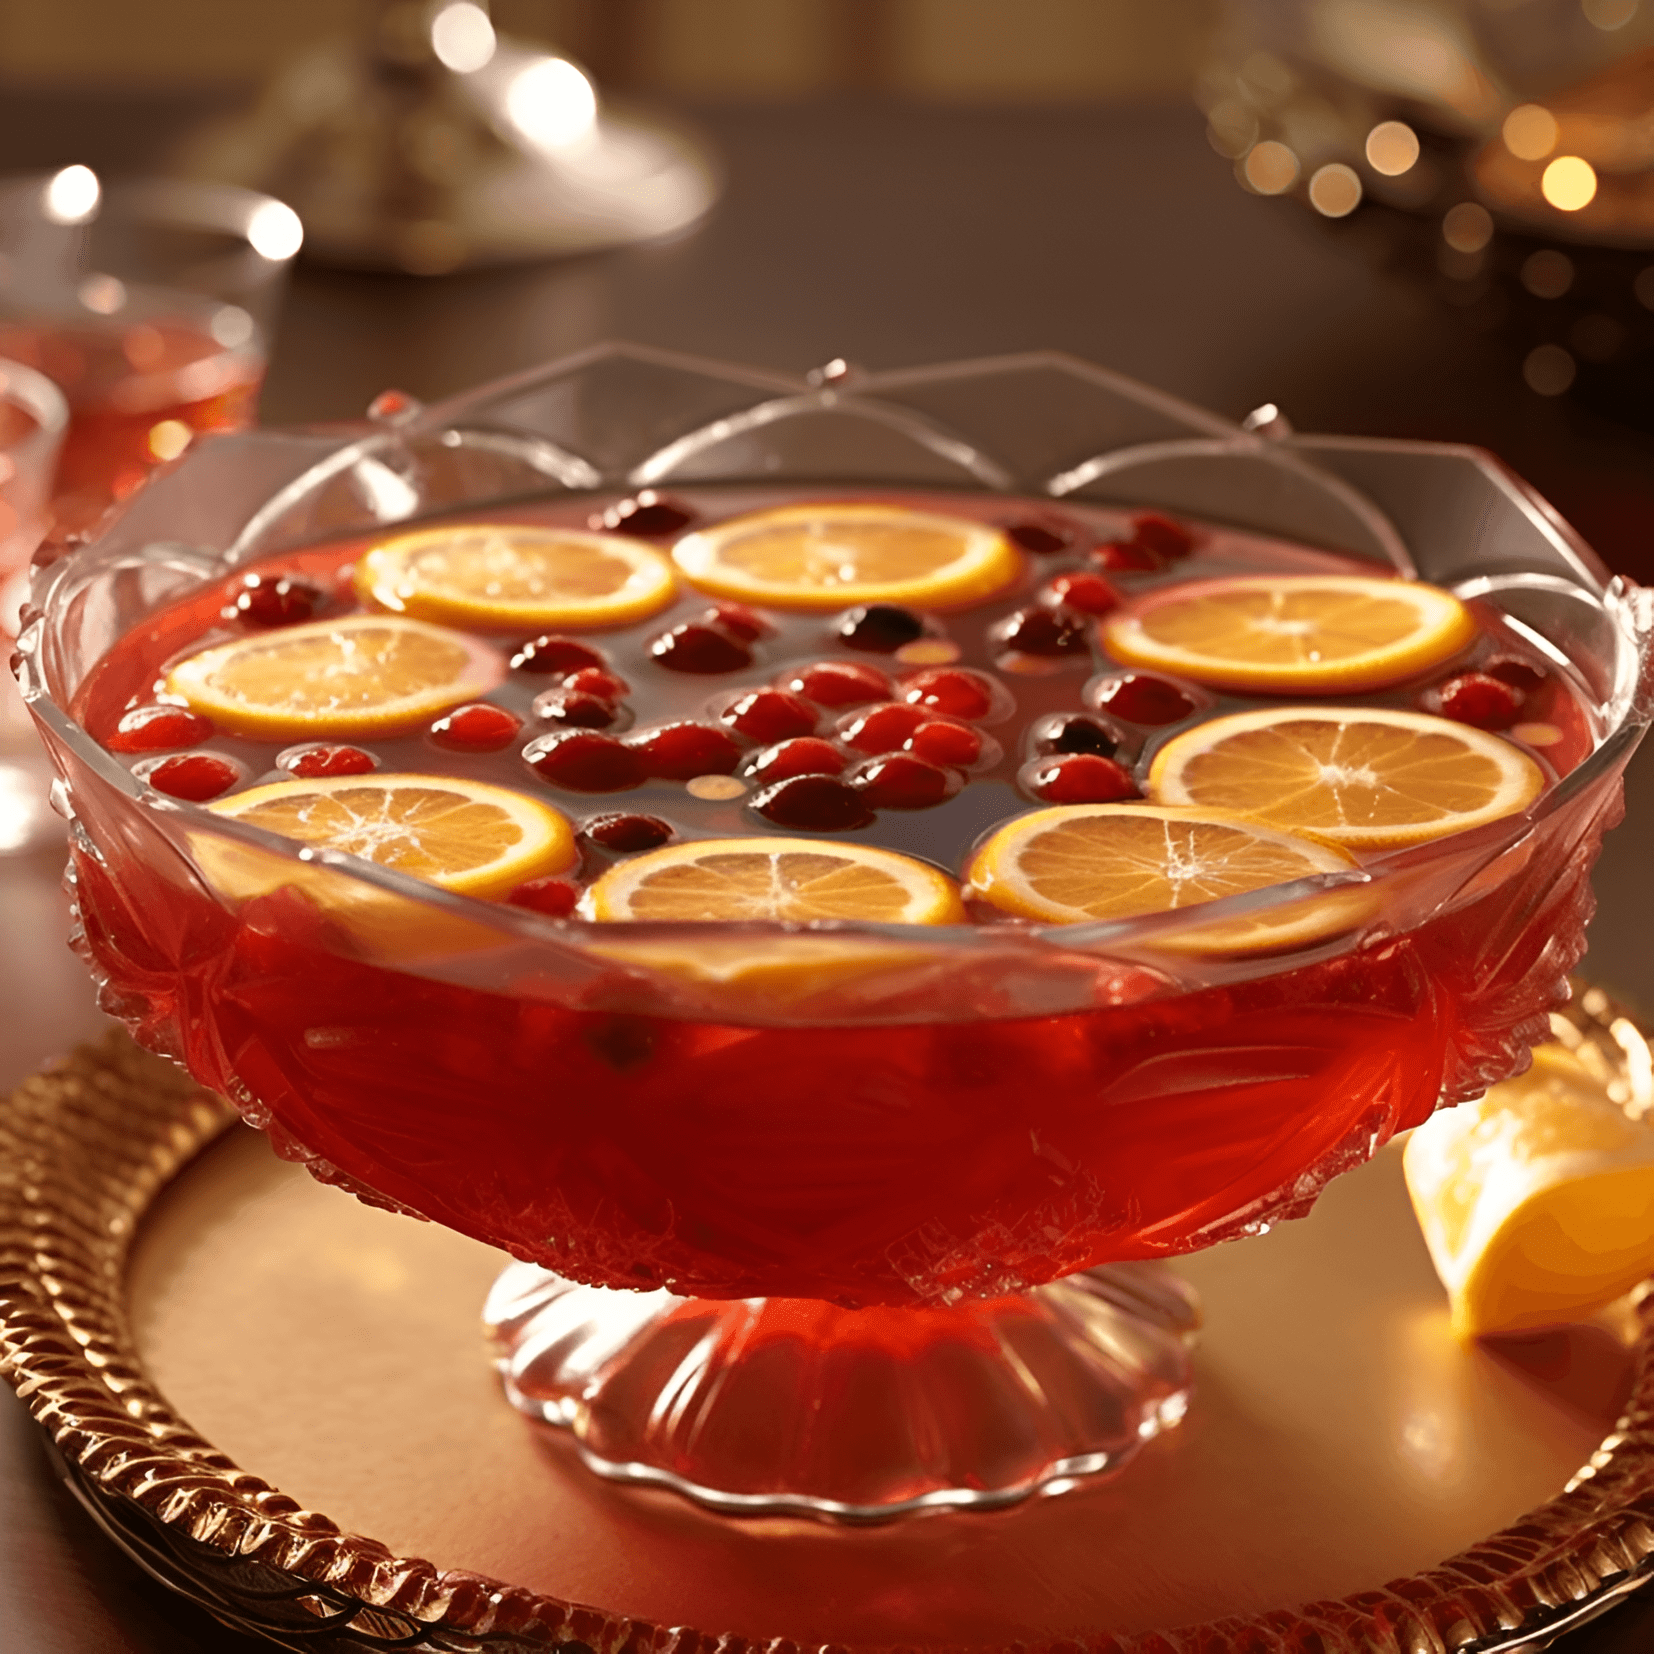 The Cranberry Punch cocktail is a delightful mix of sweet, tart, and tangy flavors. The cranberry juice provides a slightly sour and fruity taste, while the orange juice adds a touch of sweetness and citrusy brightness. The overall flavor is well-balanced, light, and refreshing.